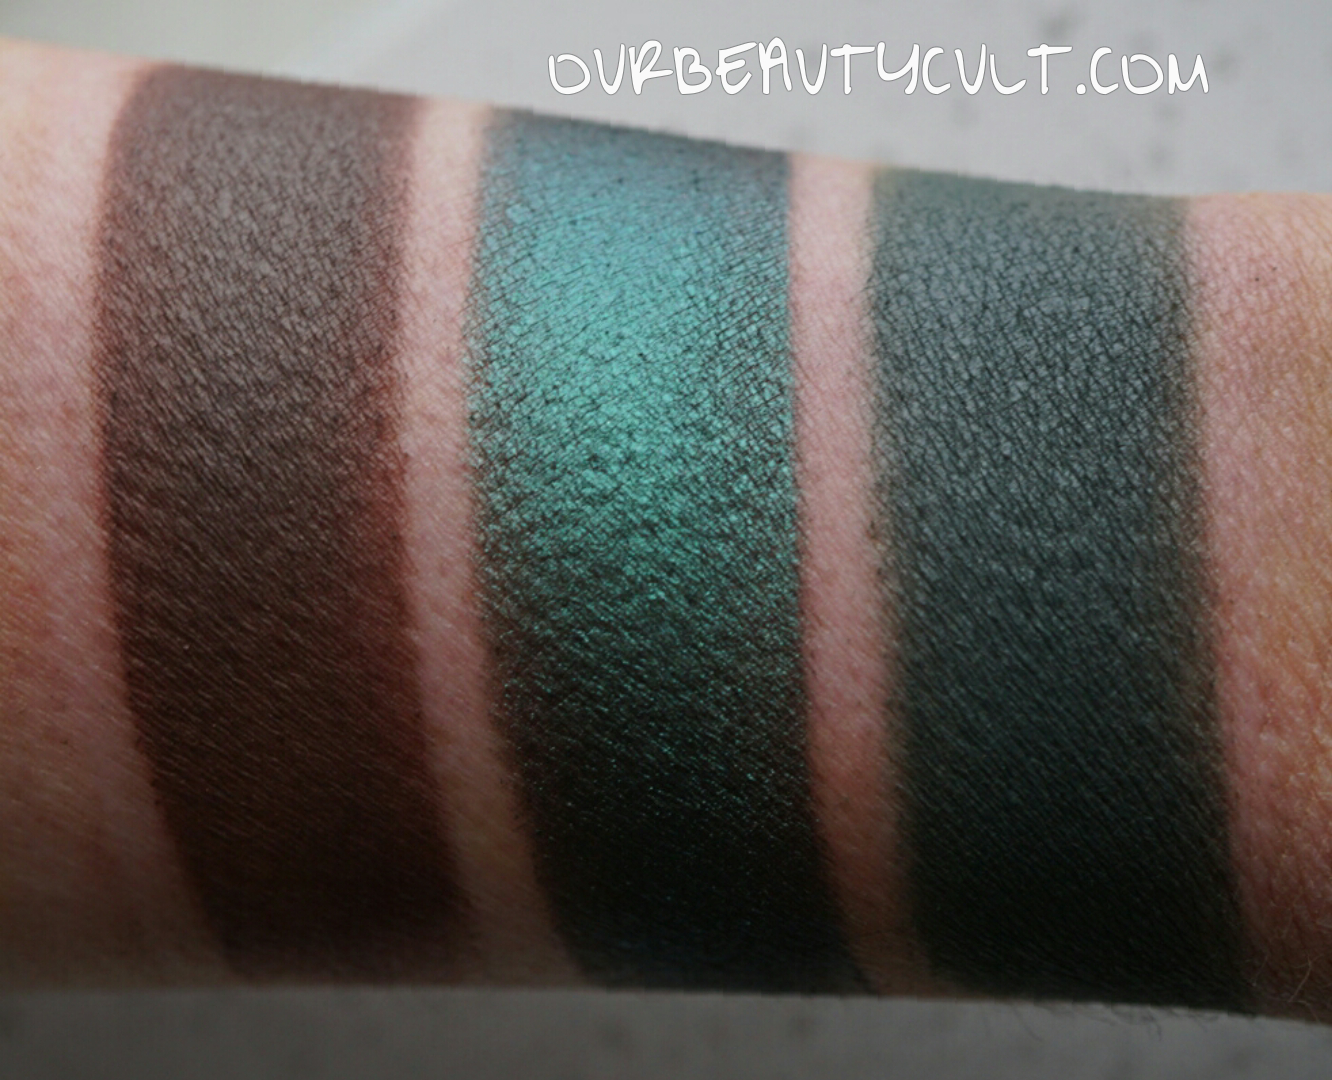 Epic Eye Makeup Makeup Geek Holiday Eyeshadow Bundle Swatches Our Beauty Cult